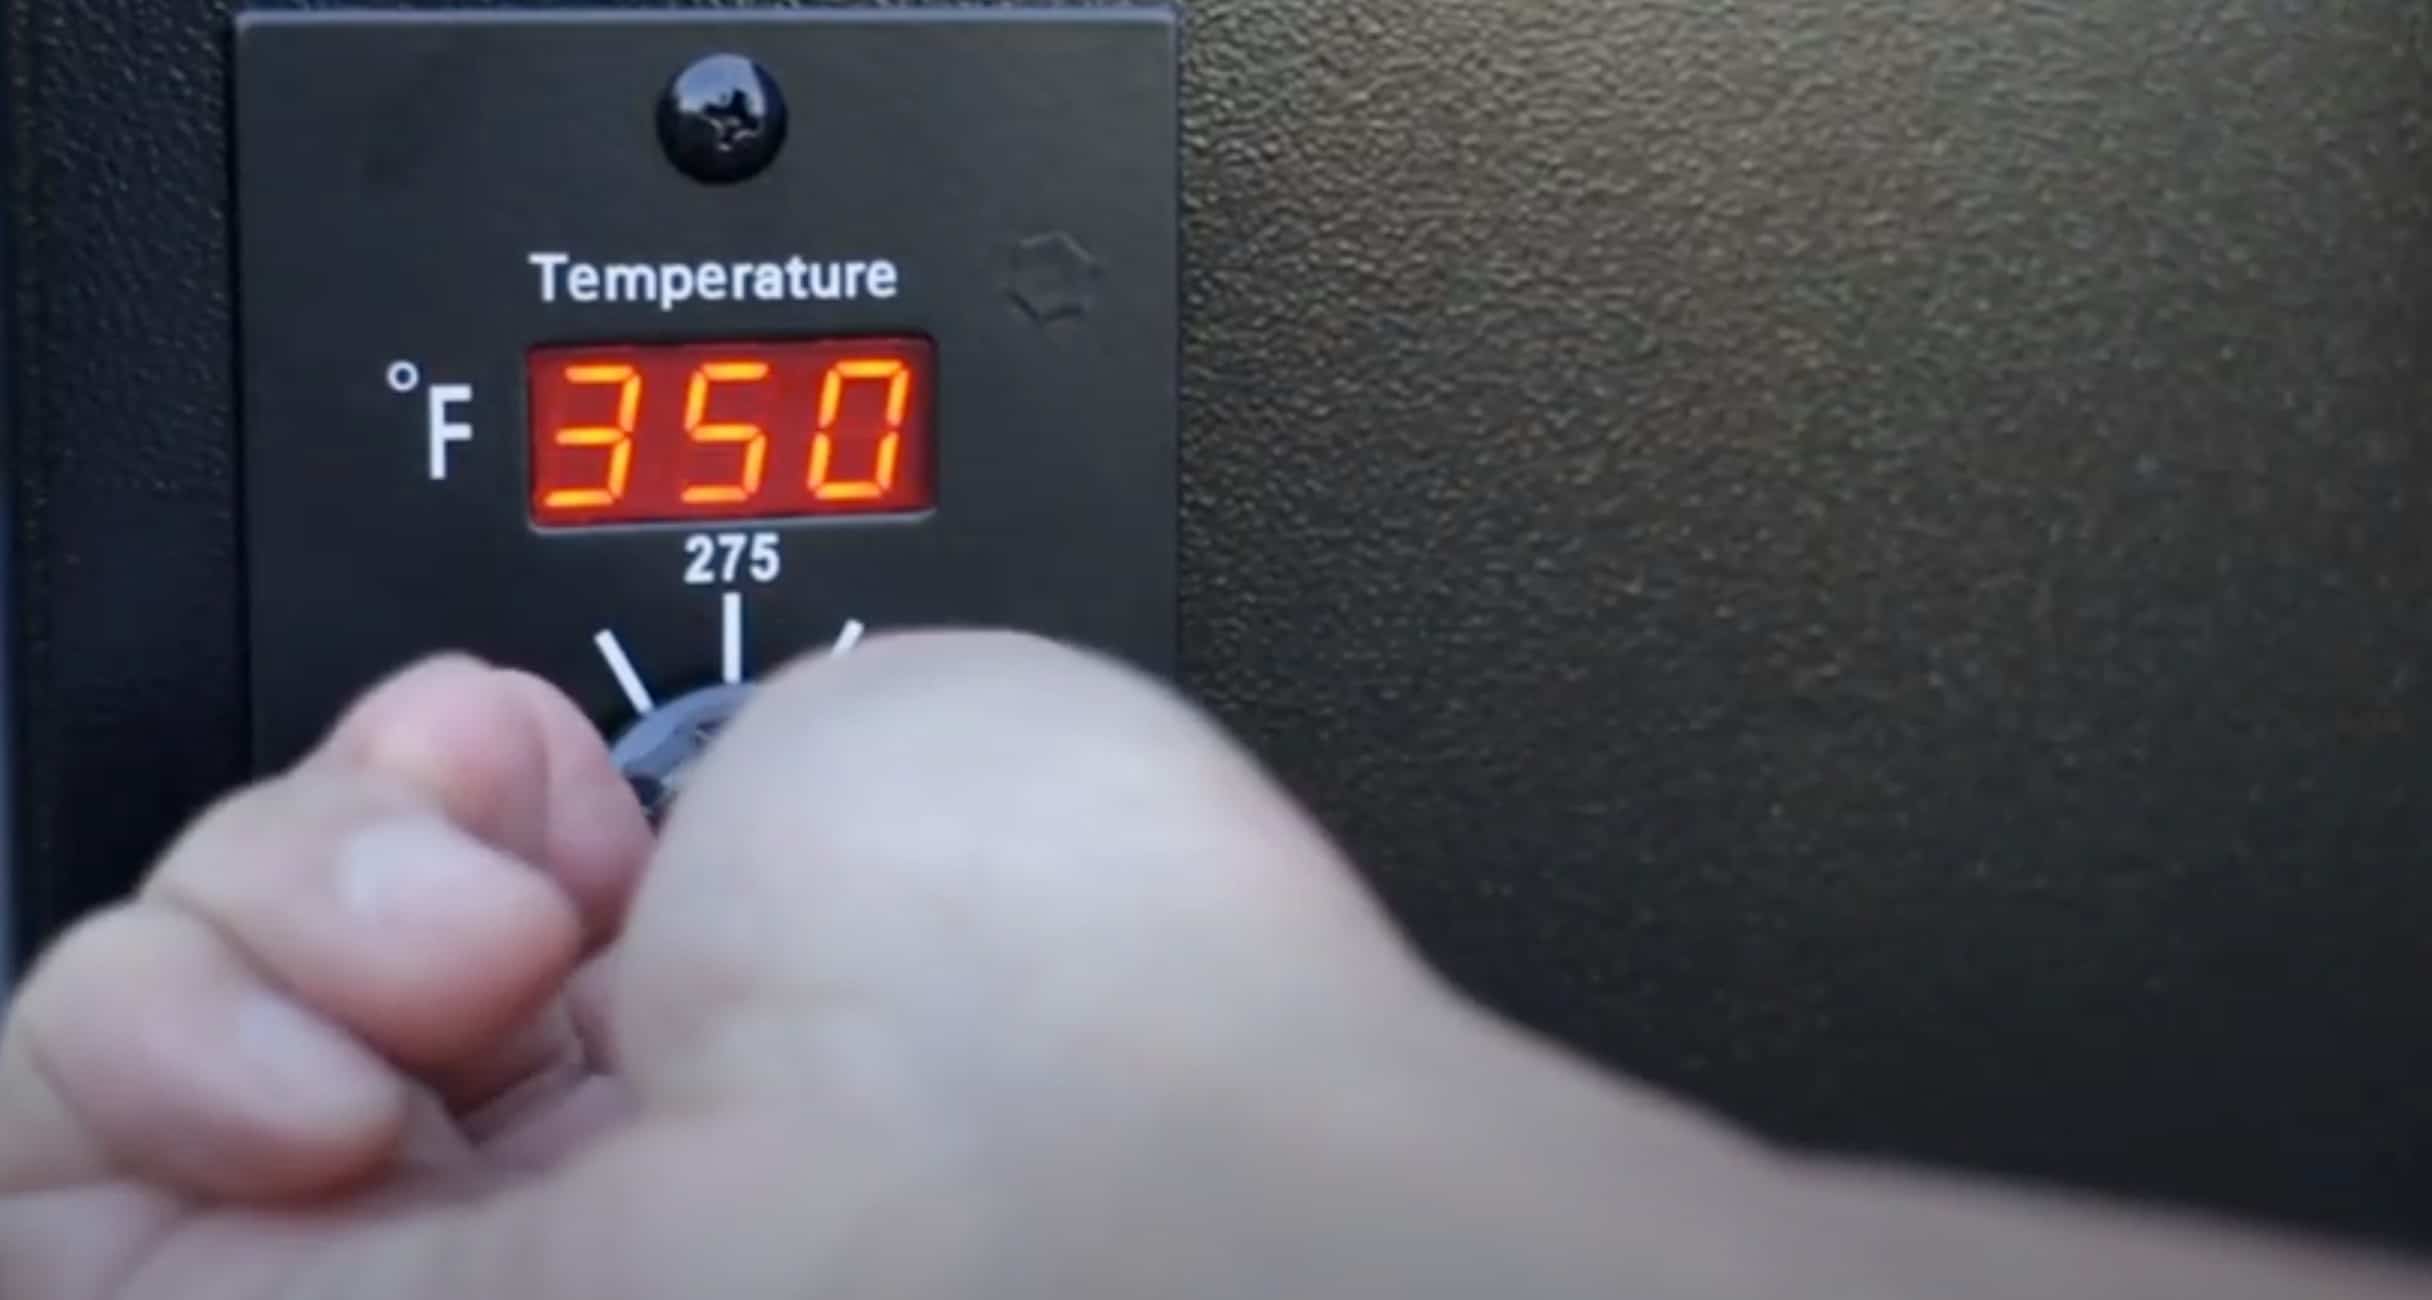 setting temperature on a smoker to 350 degrees F